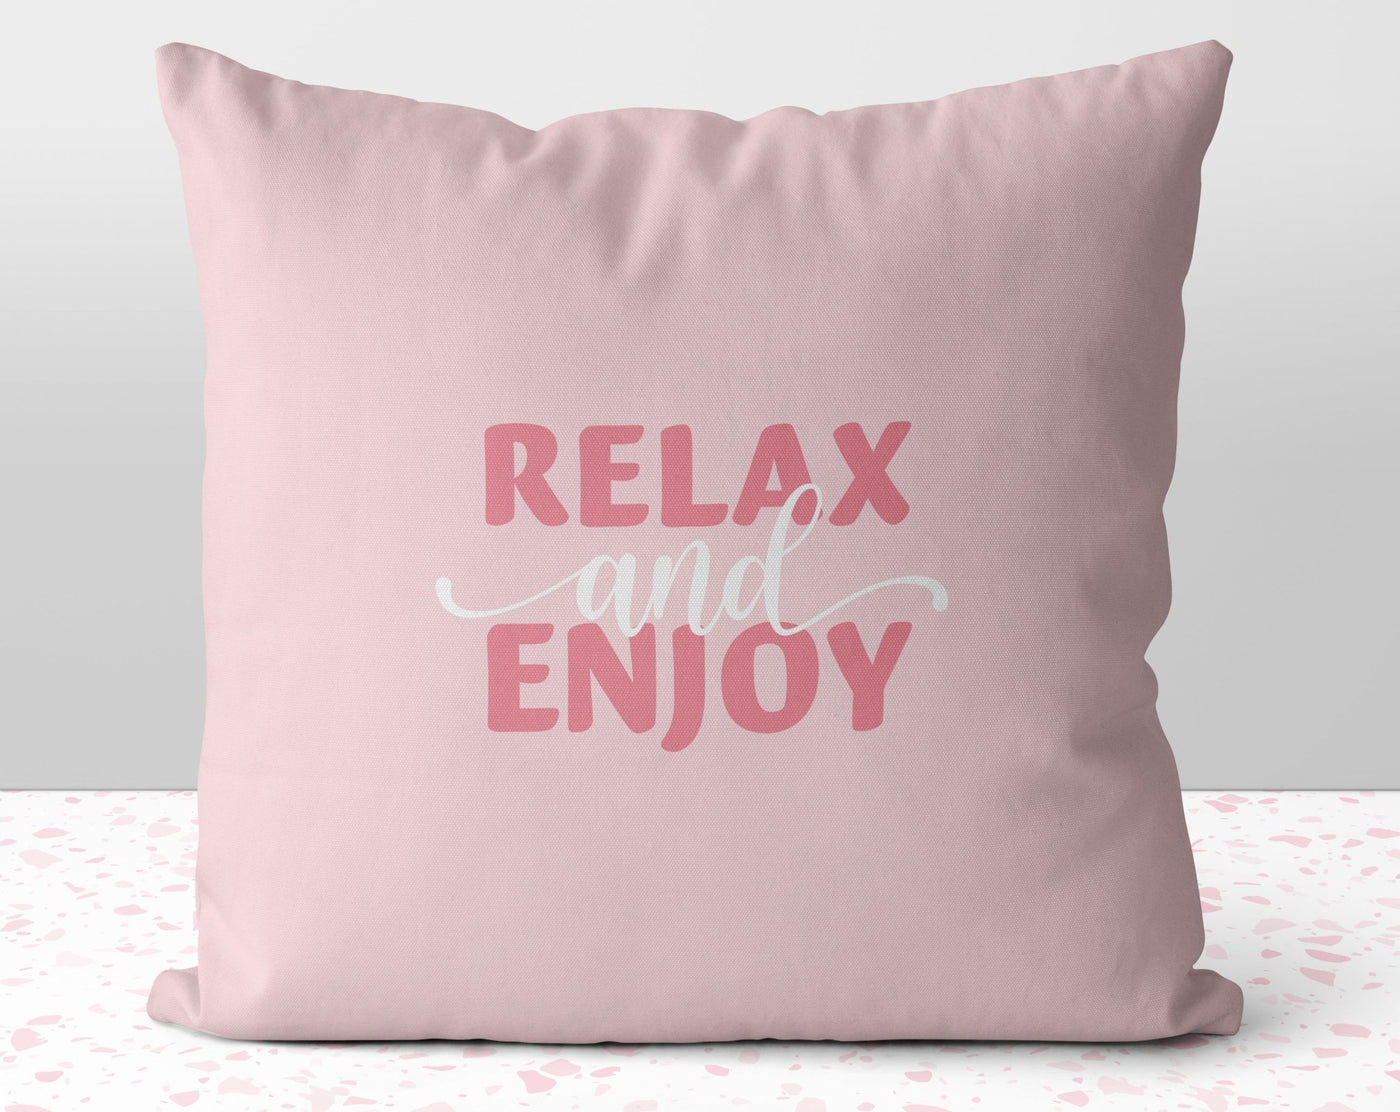 Flamboyance of Flamingos Summer Fun Relax and Enjoy Pink Square Pillow with Cover Throw with Insert - Cush Potato Pillows